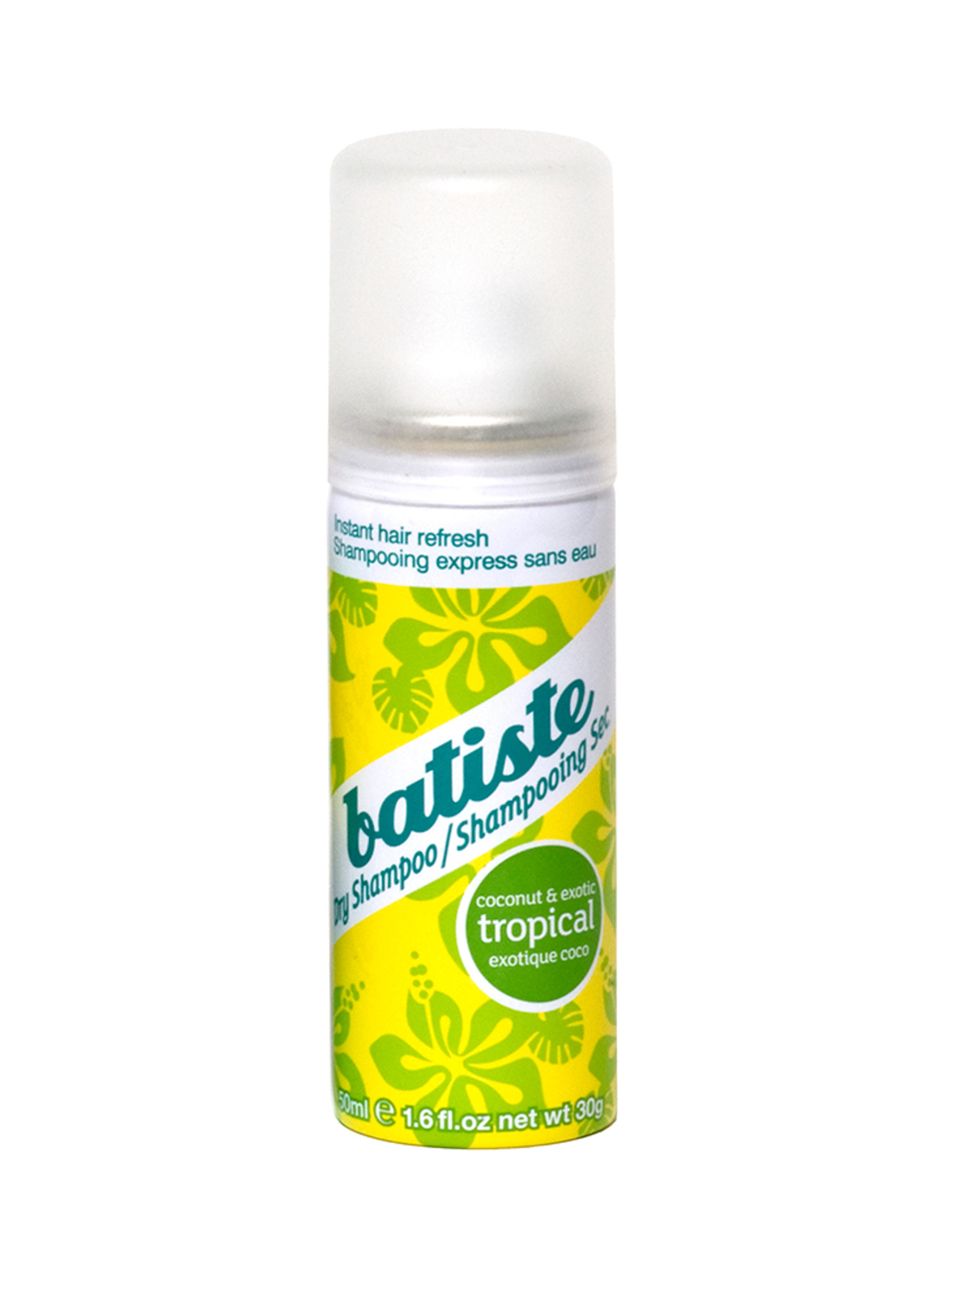 <p>Batiste Dry Shampoo, £1.55</p>

<p>Give your roots a couple sprays of dry shampoo to mask any smells and give the dishevelled look more like an 'intetional volume'</p>